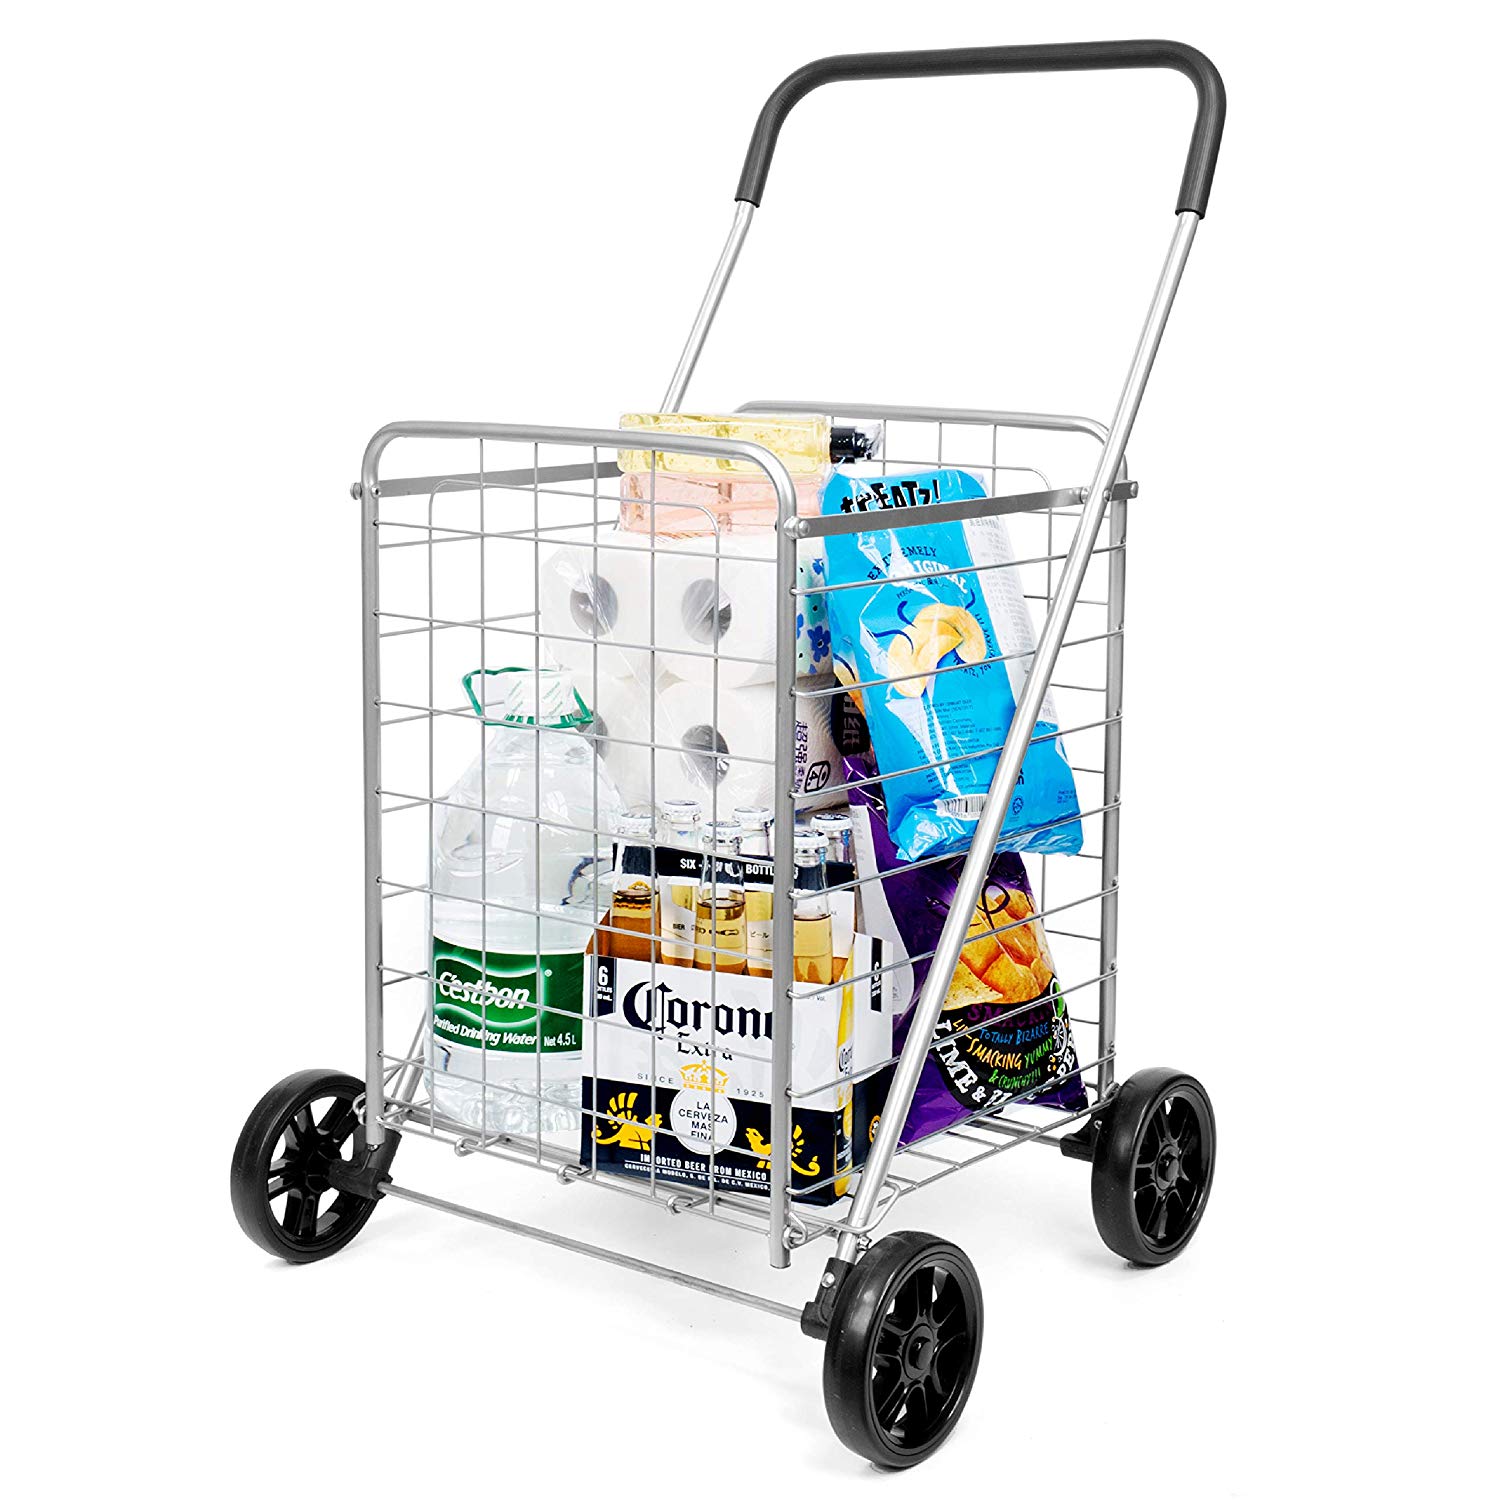 This cart is big enough to carry a Mac Pro, and some groceries.